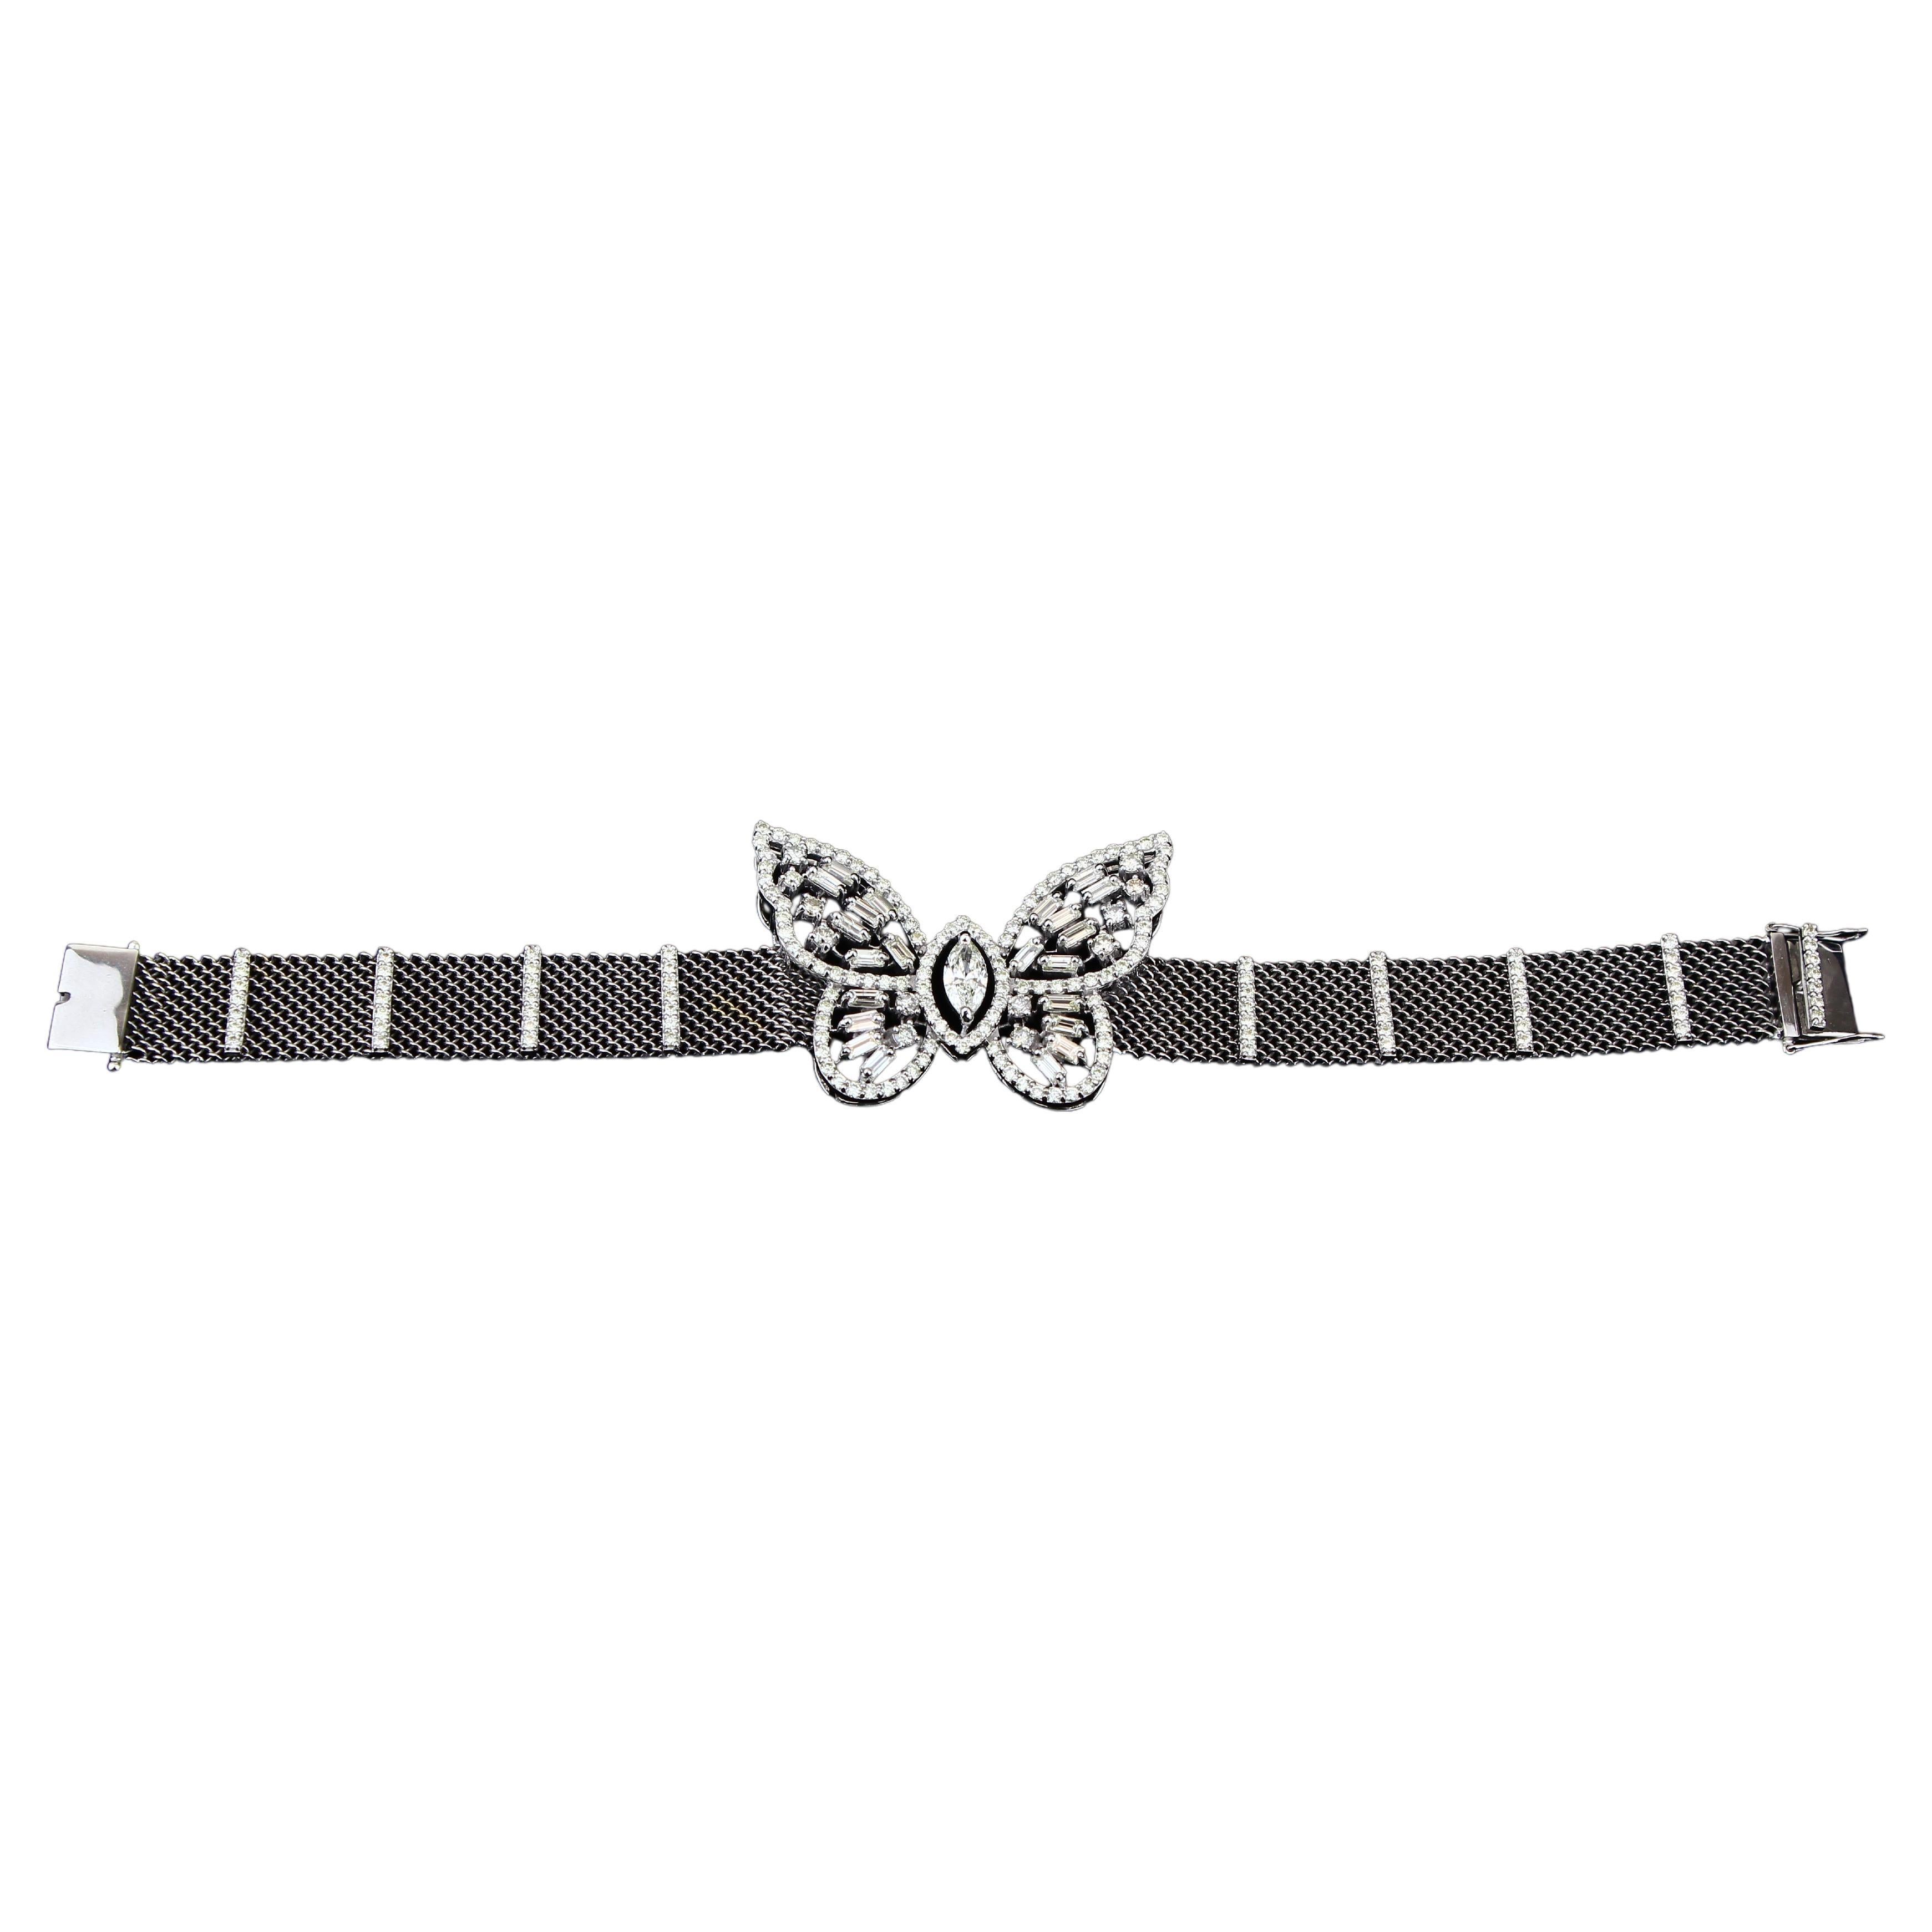 Features marquise & baguette cut diamonds with dainty round diamonds around them. Made with the highest quality natural diamonds on a 100% guaranteed 18k solid gold. These diamonds are certified and cruelty free.

THE STONES-
This bracelet consists